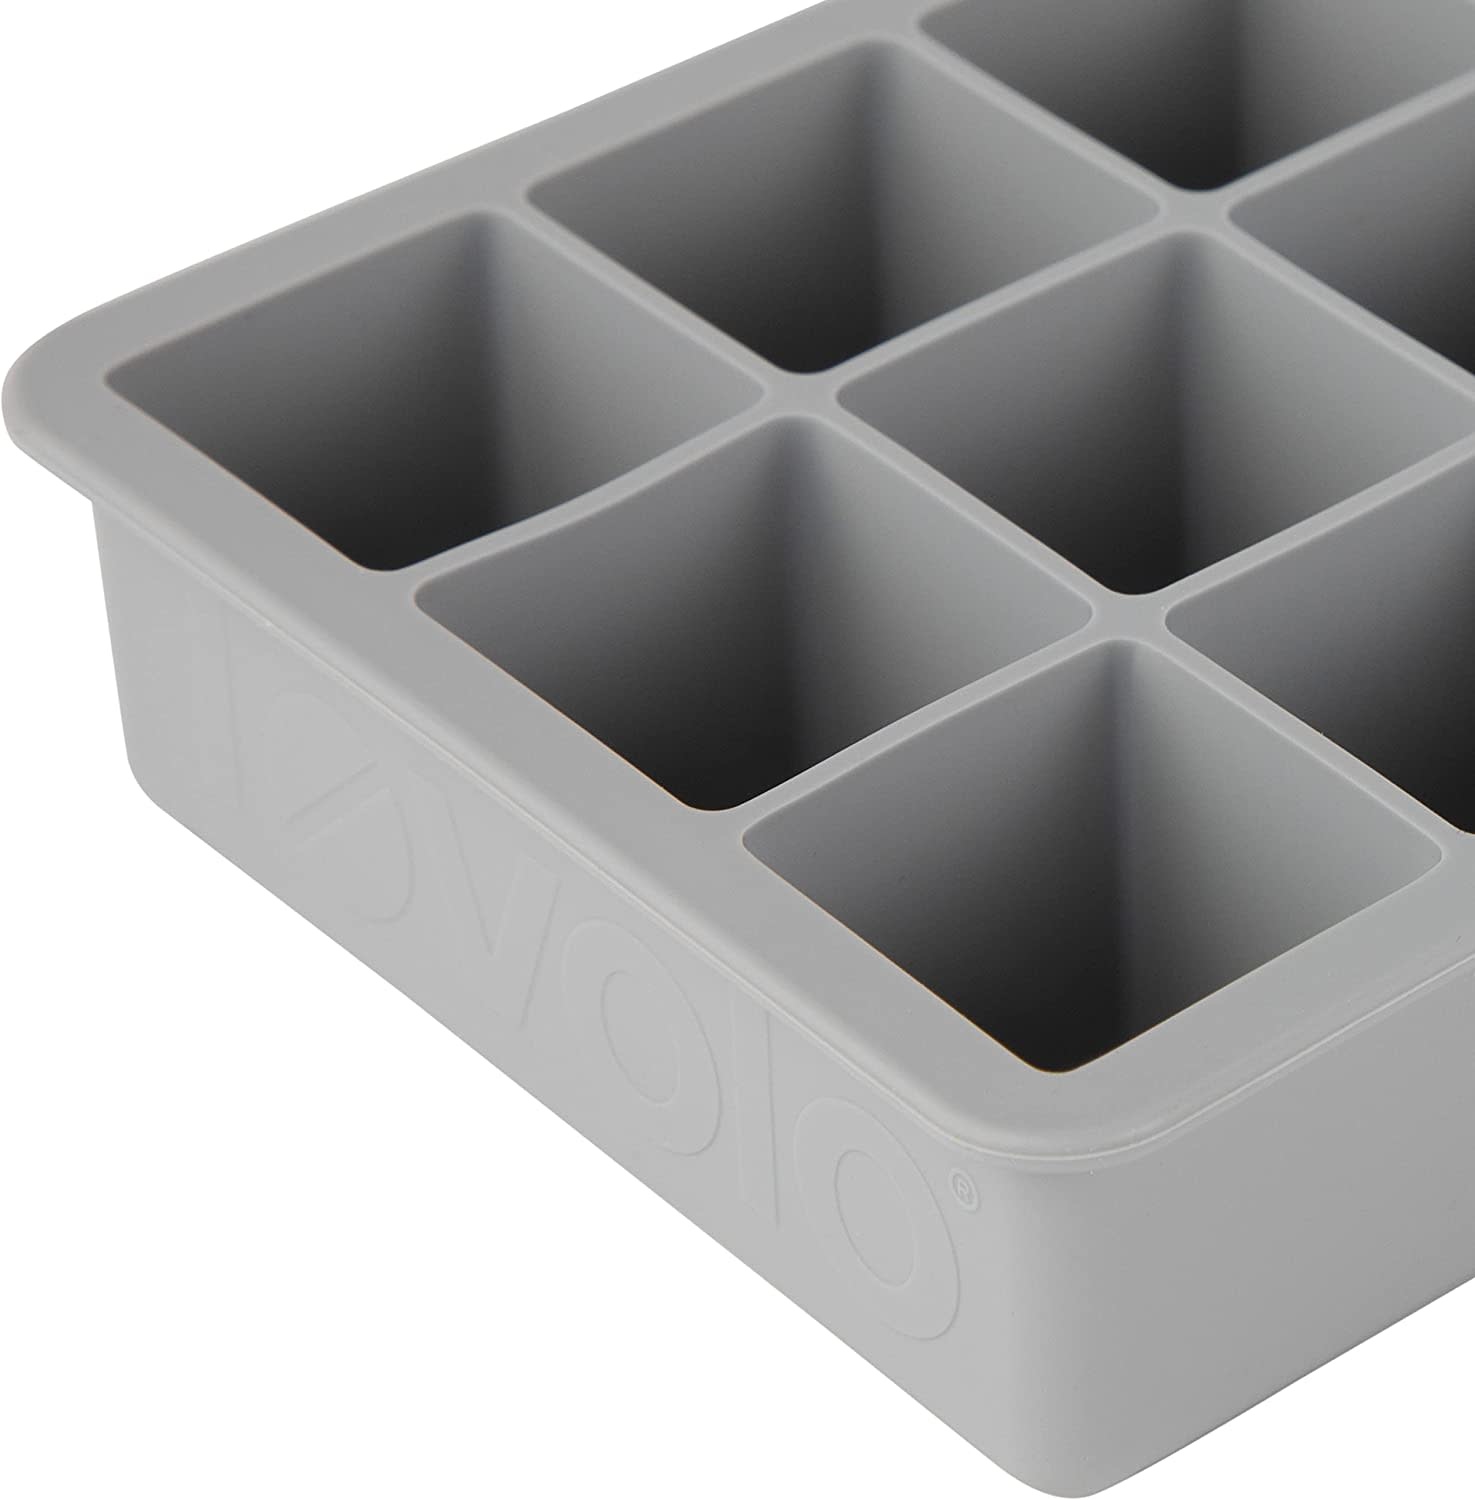 The Best Ice Cube Tray Is the Tovolo